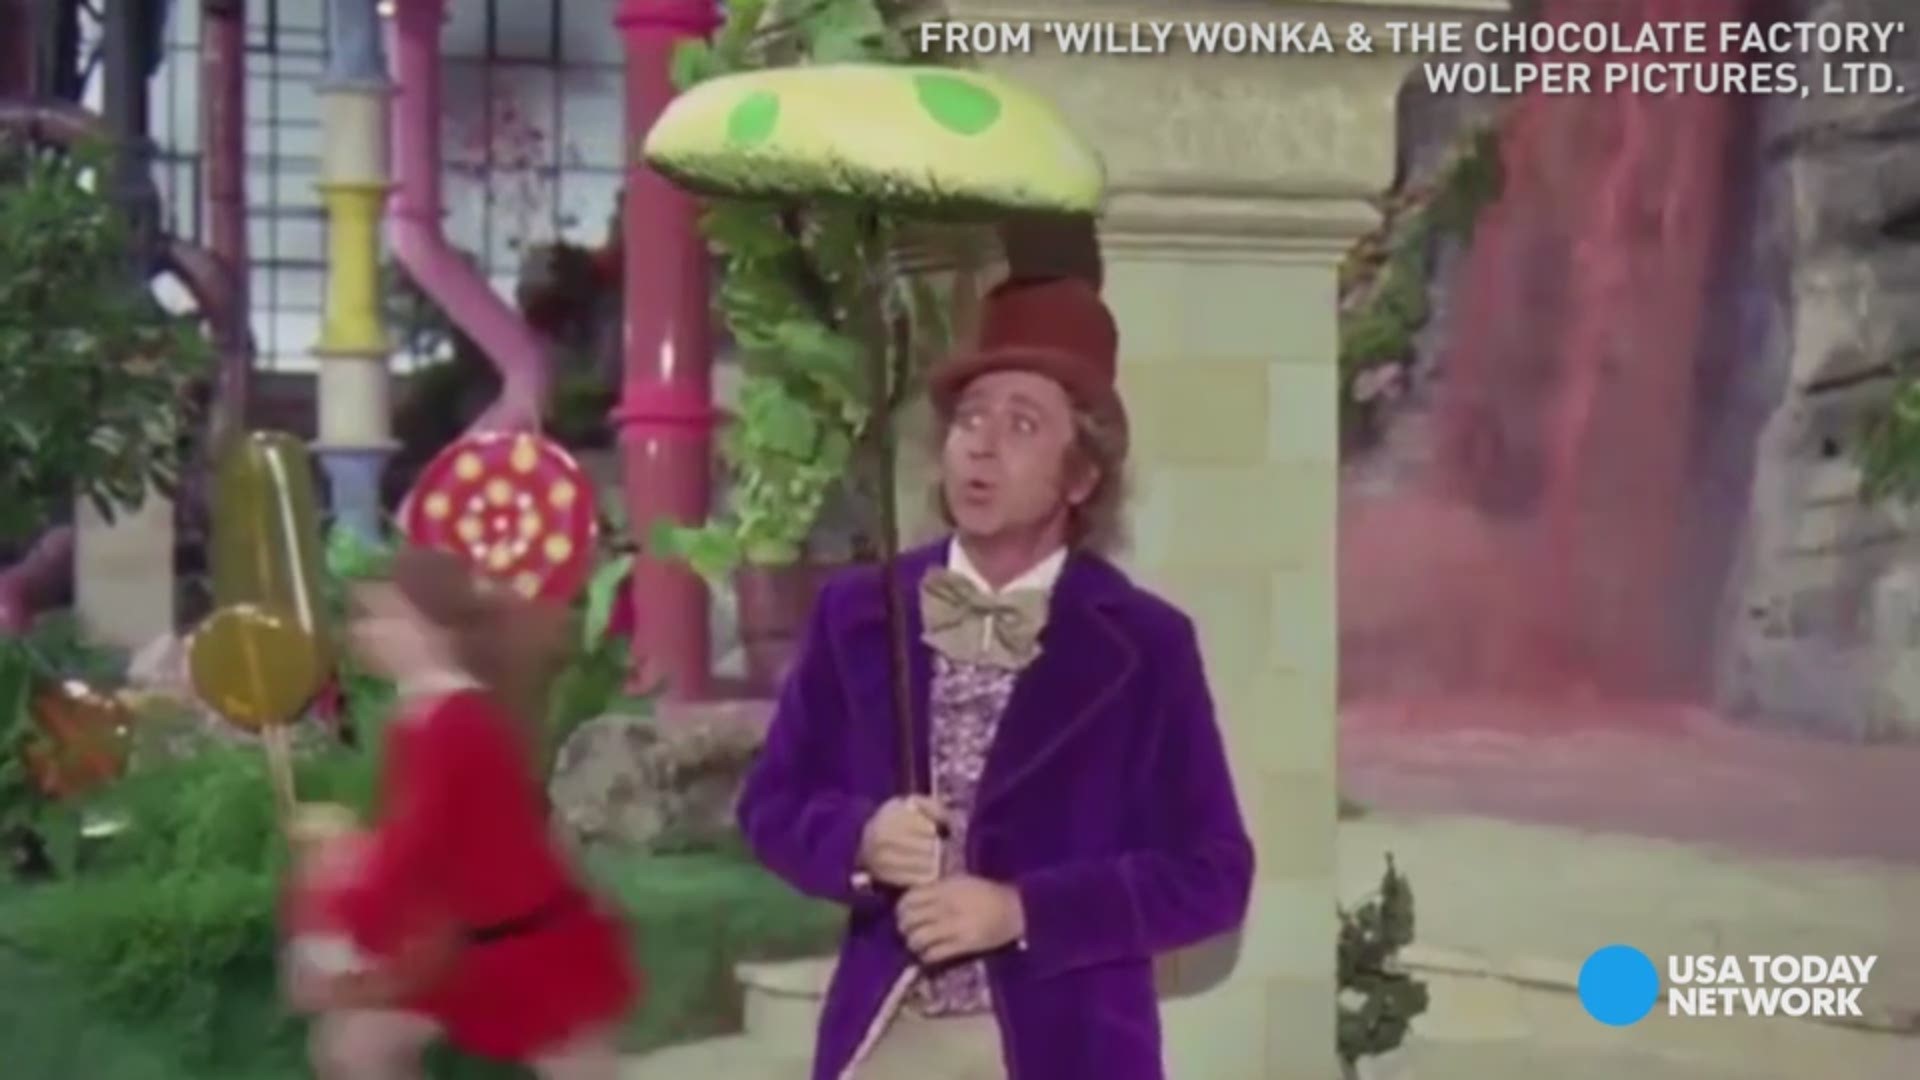 Gene Wilder, famous for his comedic roles in Willy Wonka and the Chocolate Factory, Blazing Saddles and Young Frankenstein, died at the age of 83.